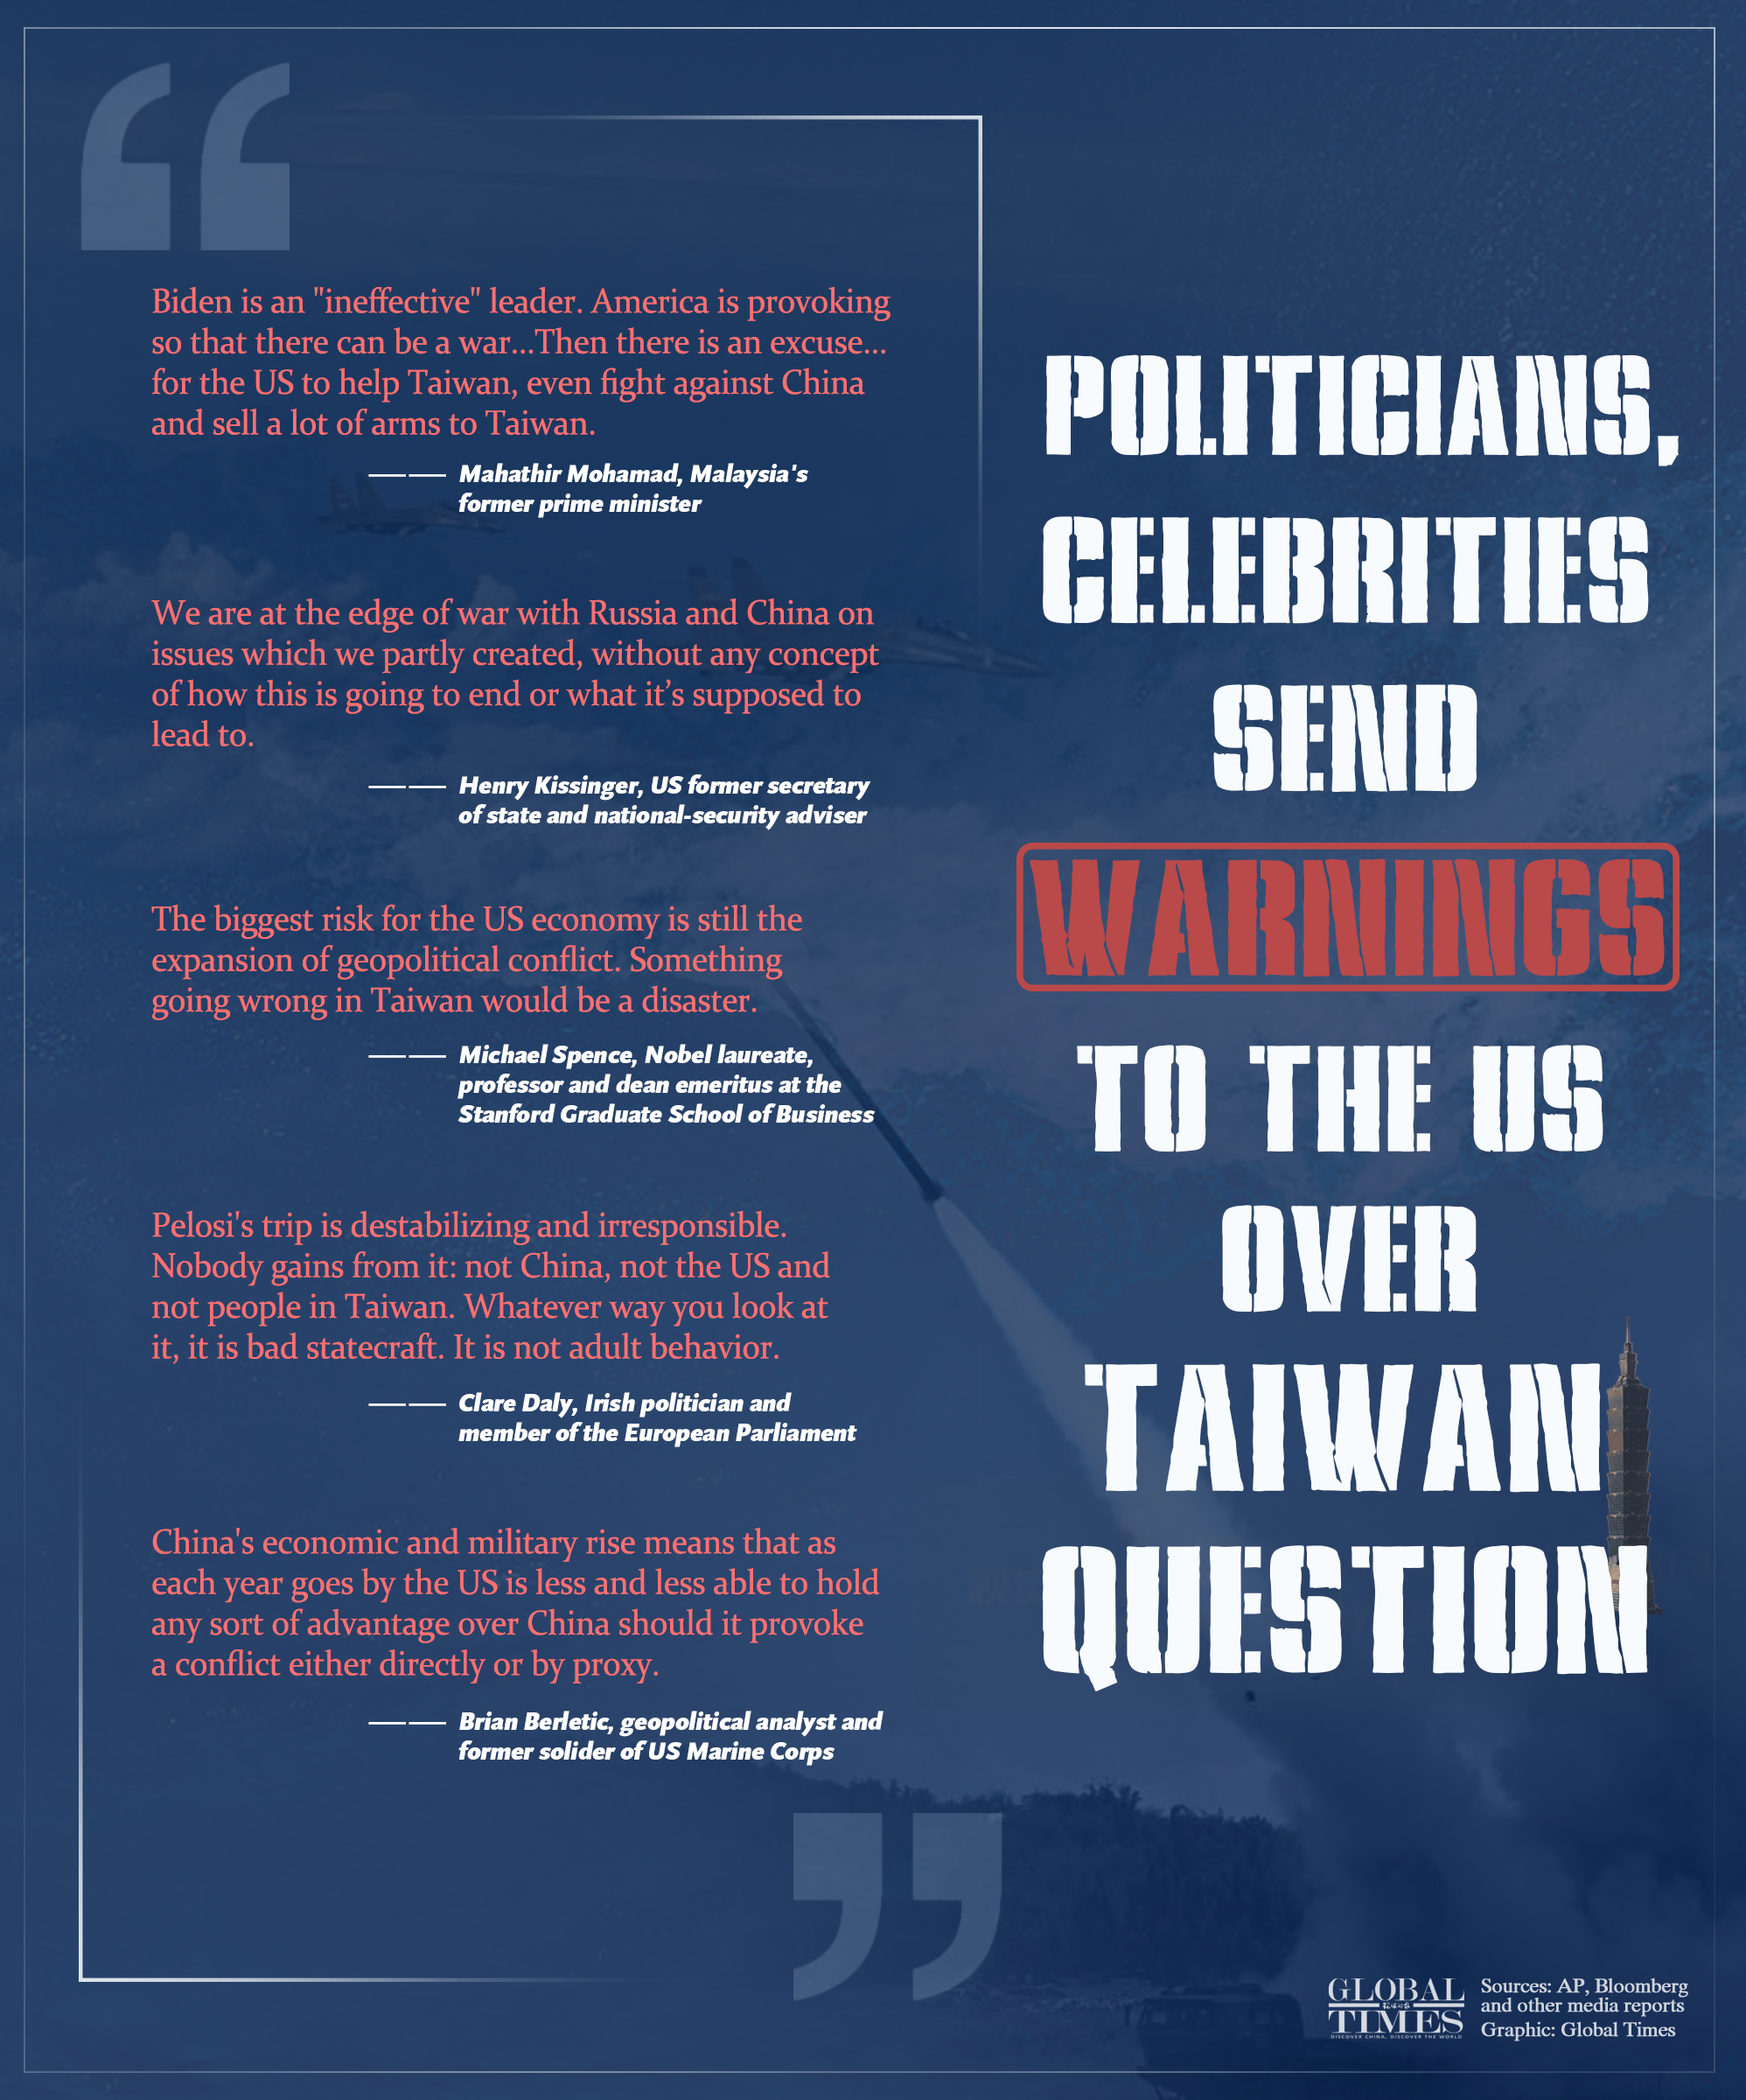 Politicians, celebrities send warnings to US over Taiwan question. Graphic: GT